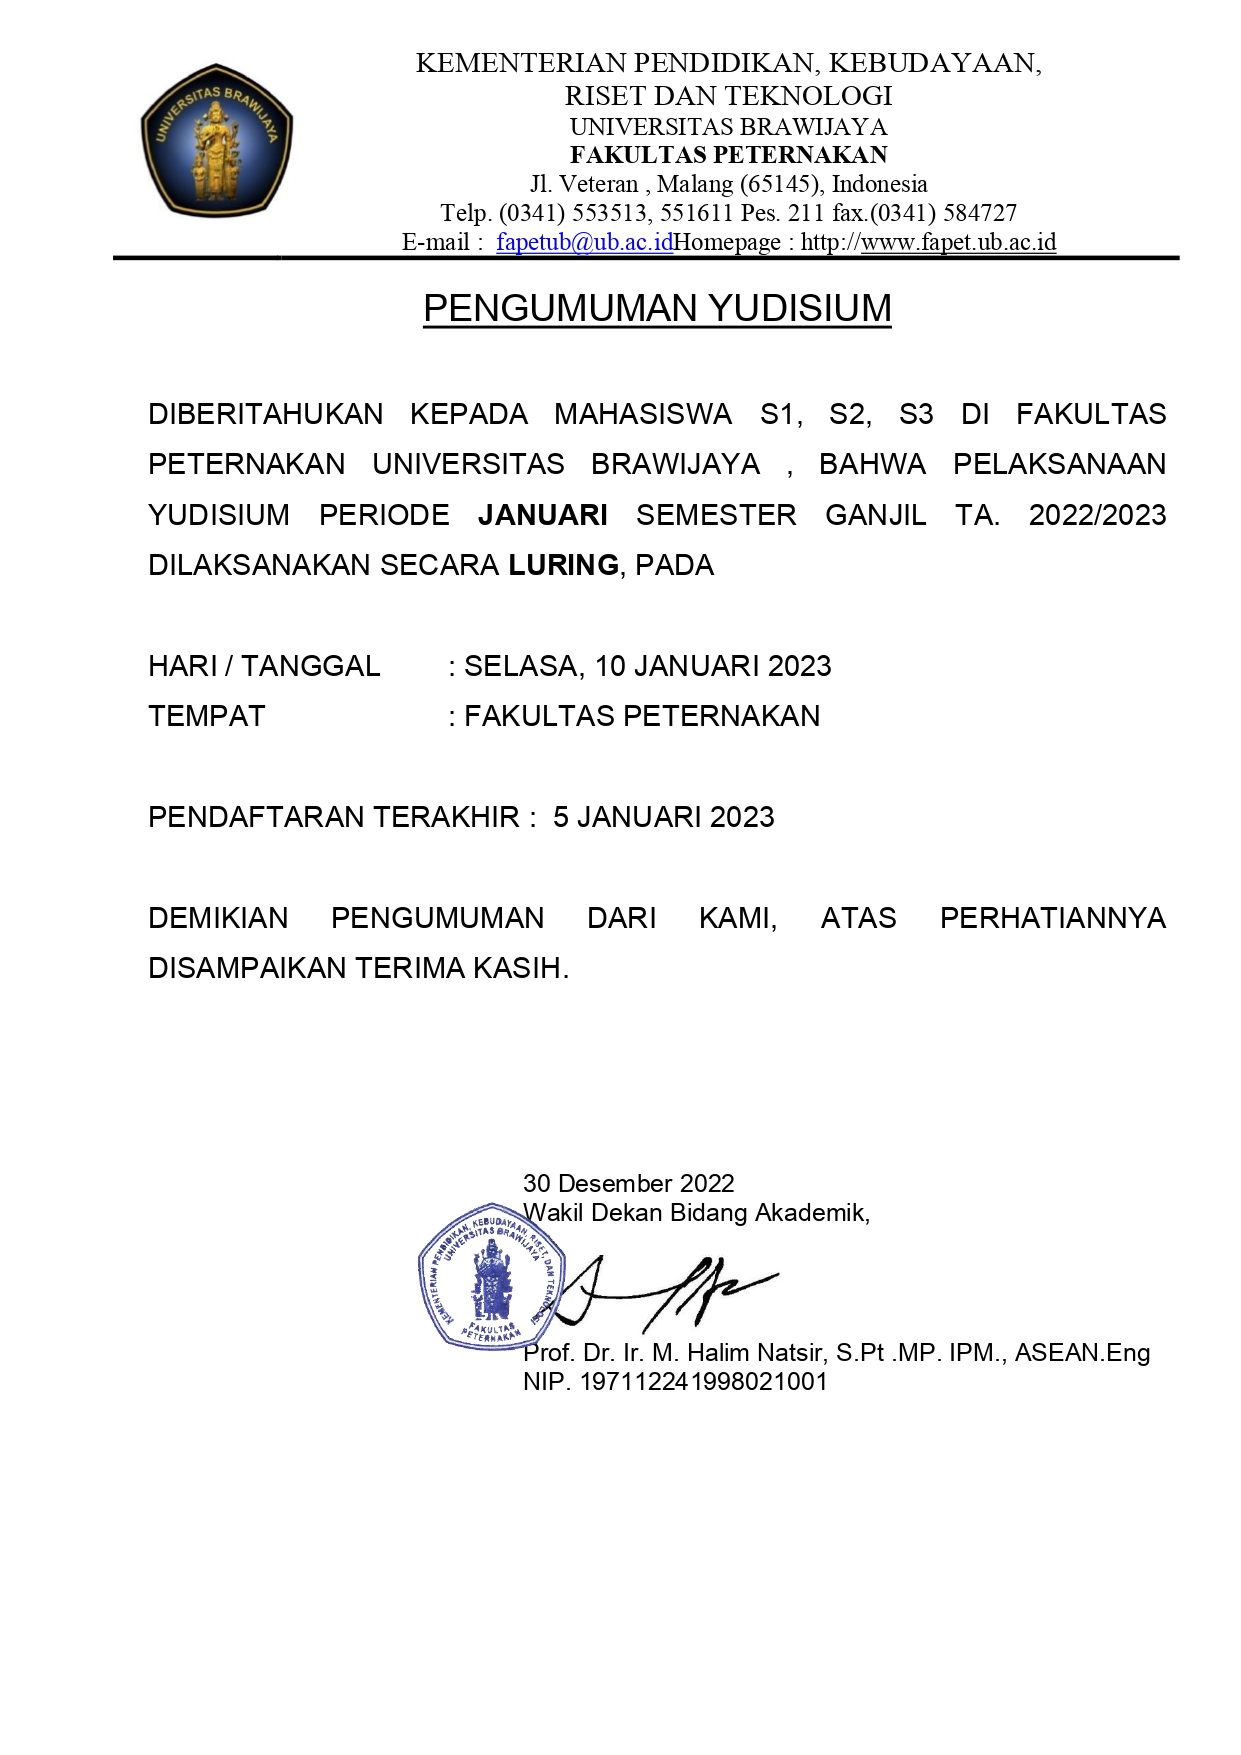 Announcement of Judicial Registration for the January 2023 Period